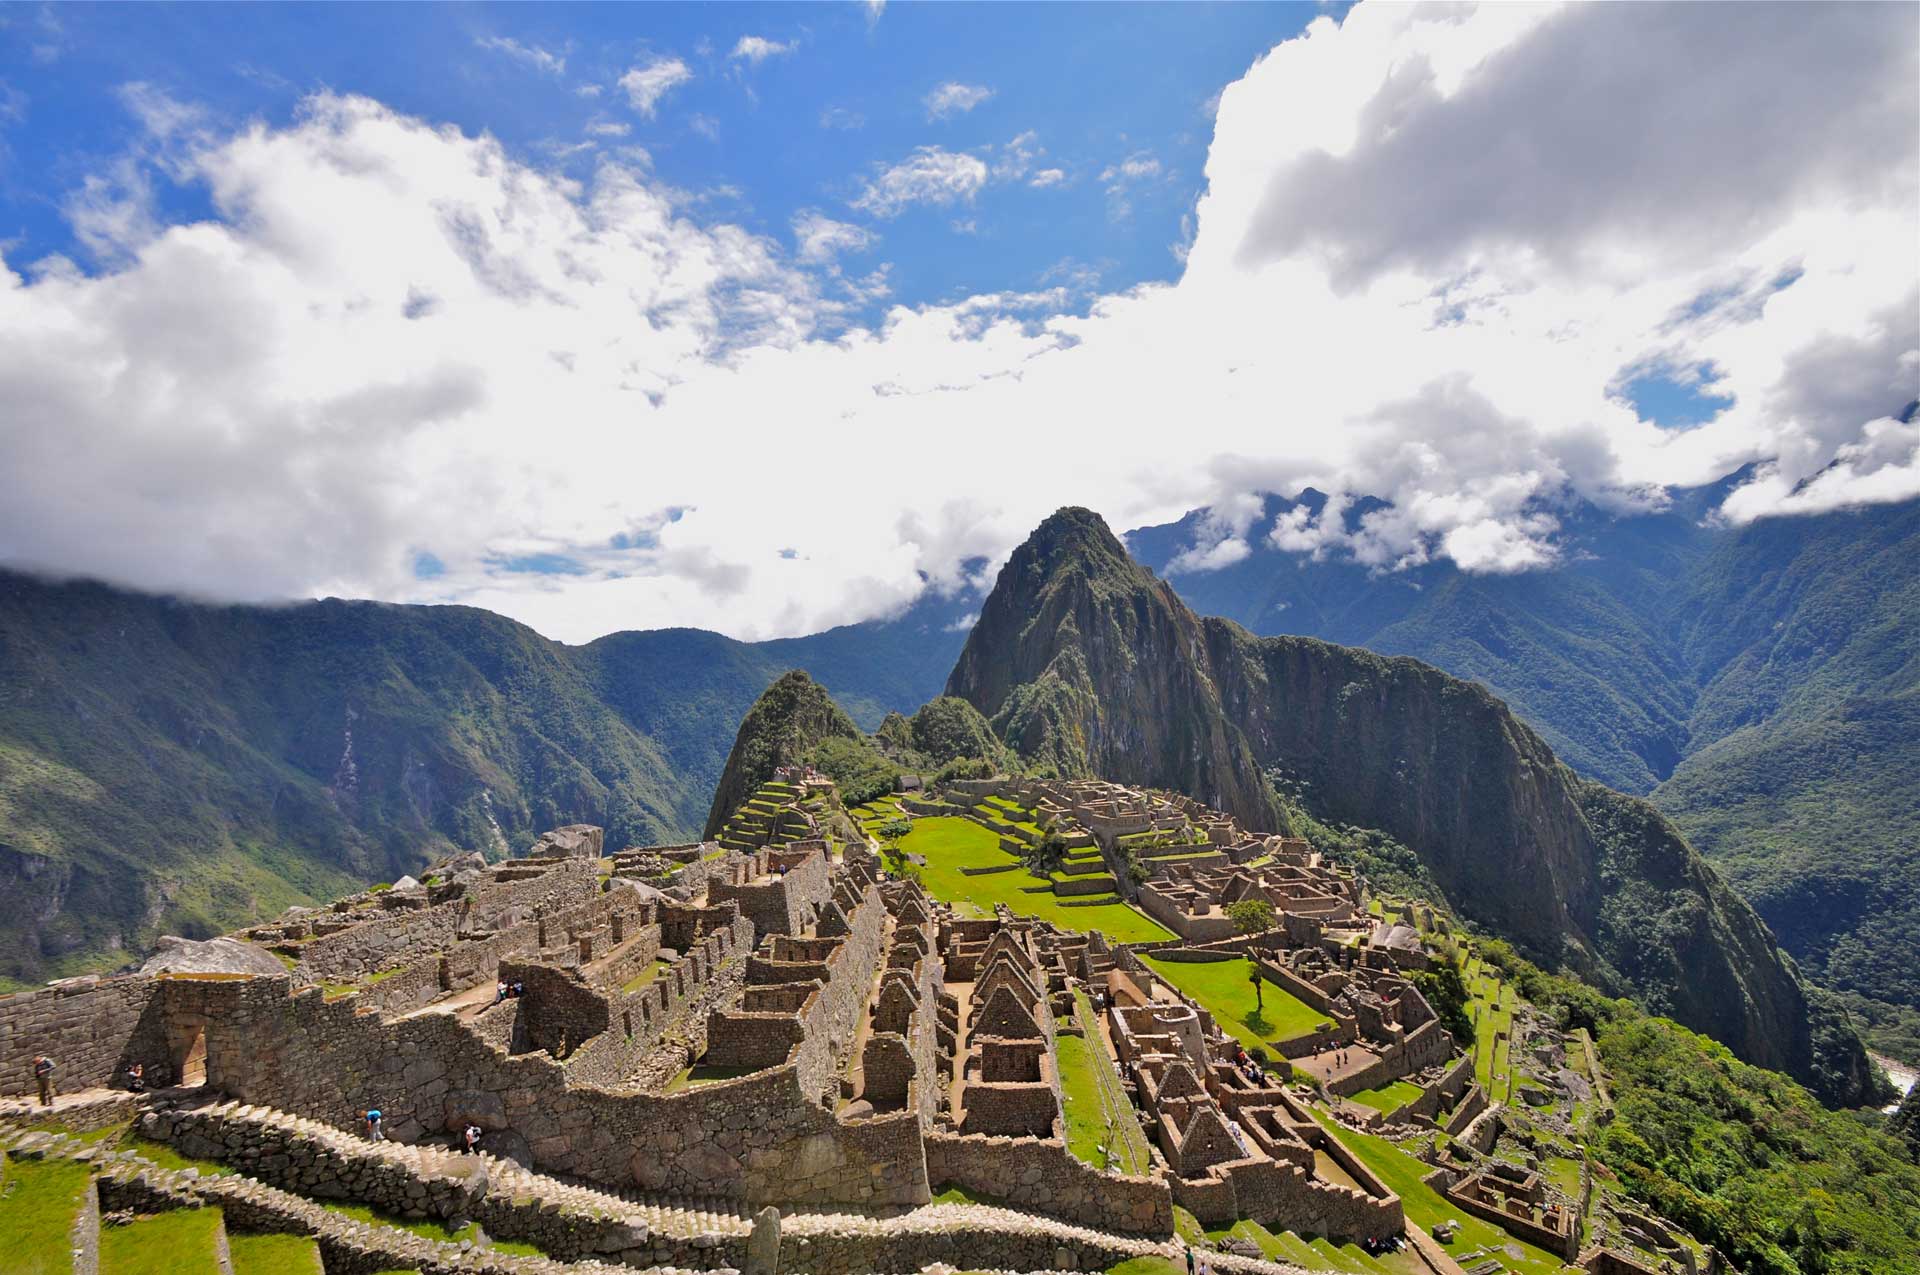 Classic image of Machu Picchu taken on one of our custom tours of Peru 